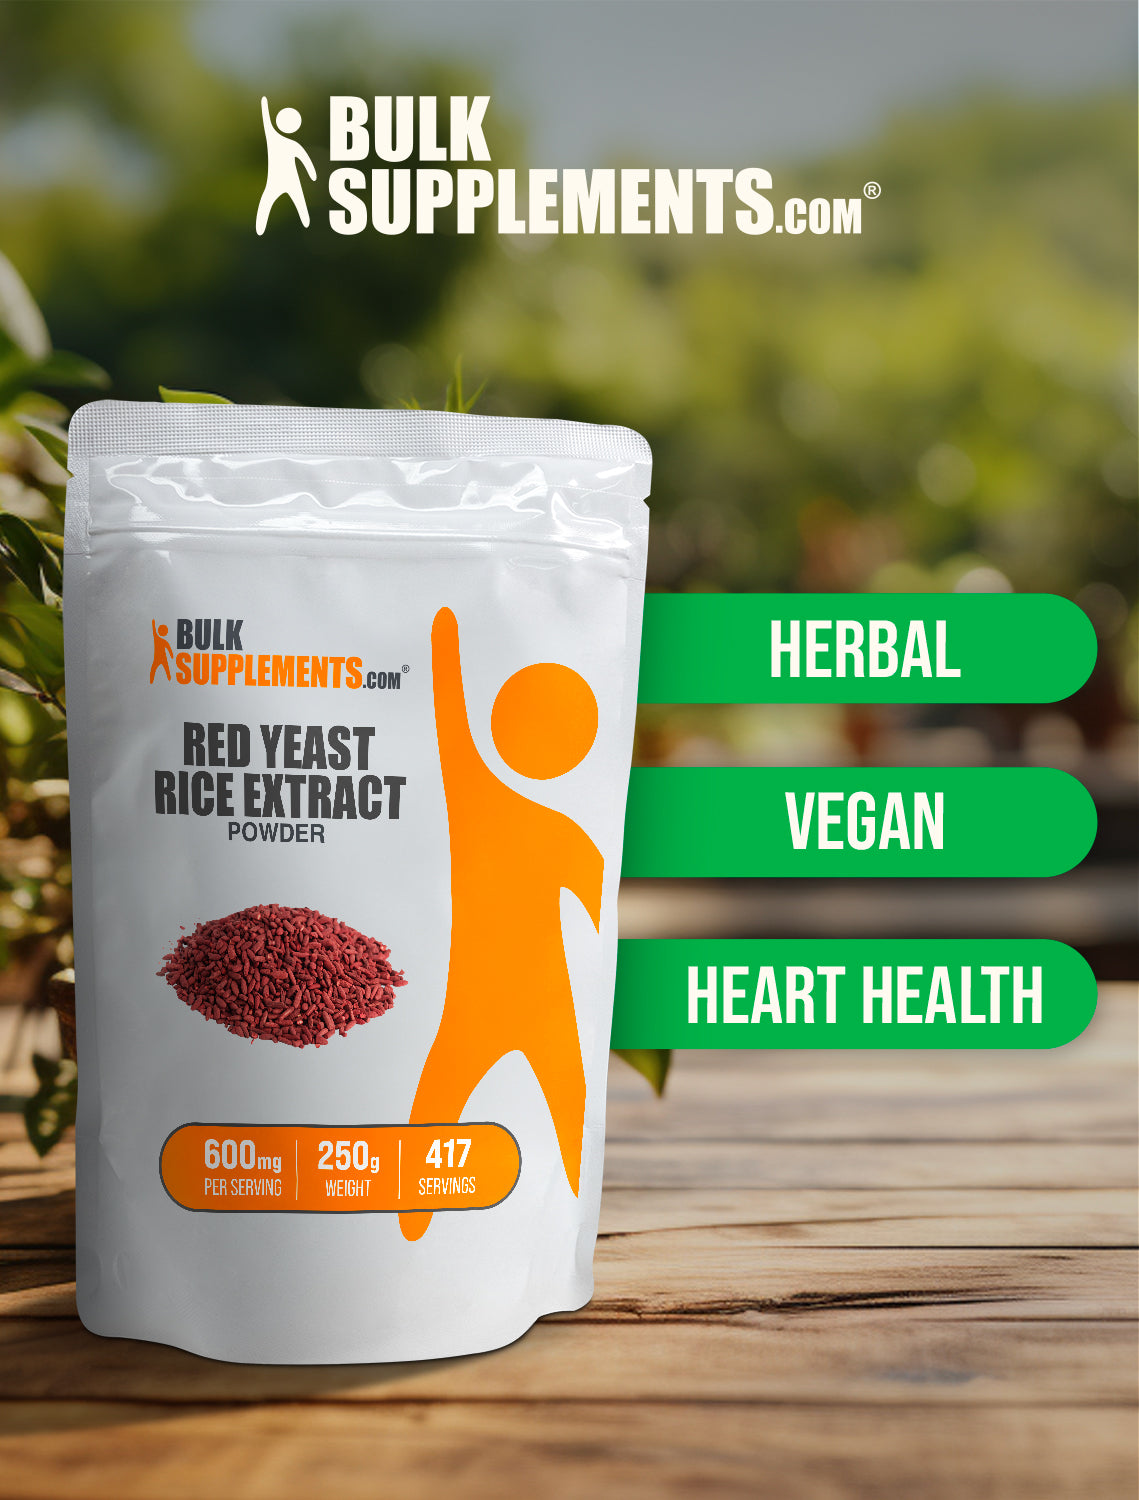 Red Yeast Rice Extract powder keyword image 250g